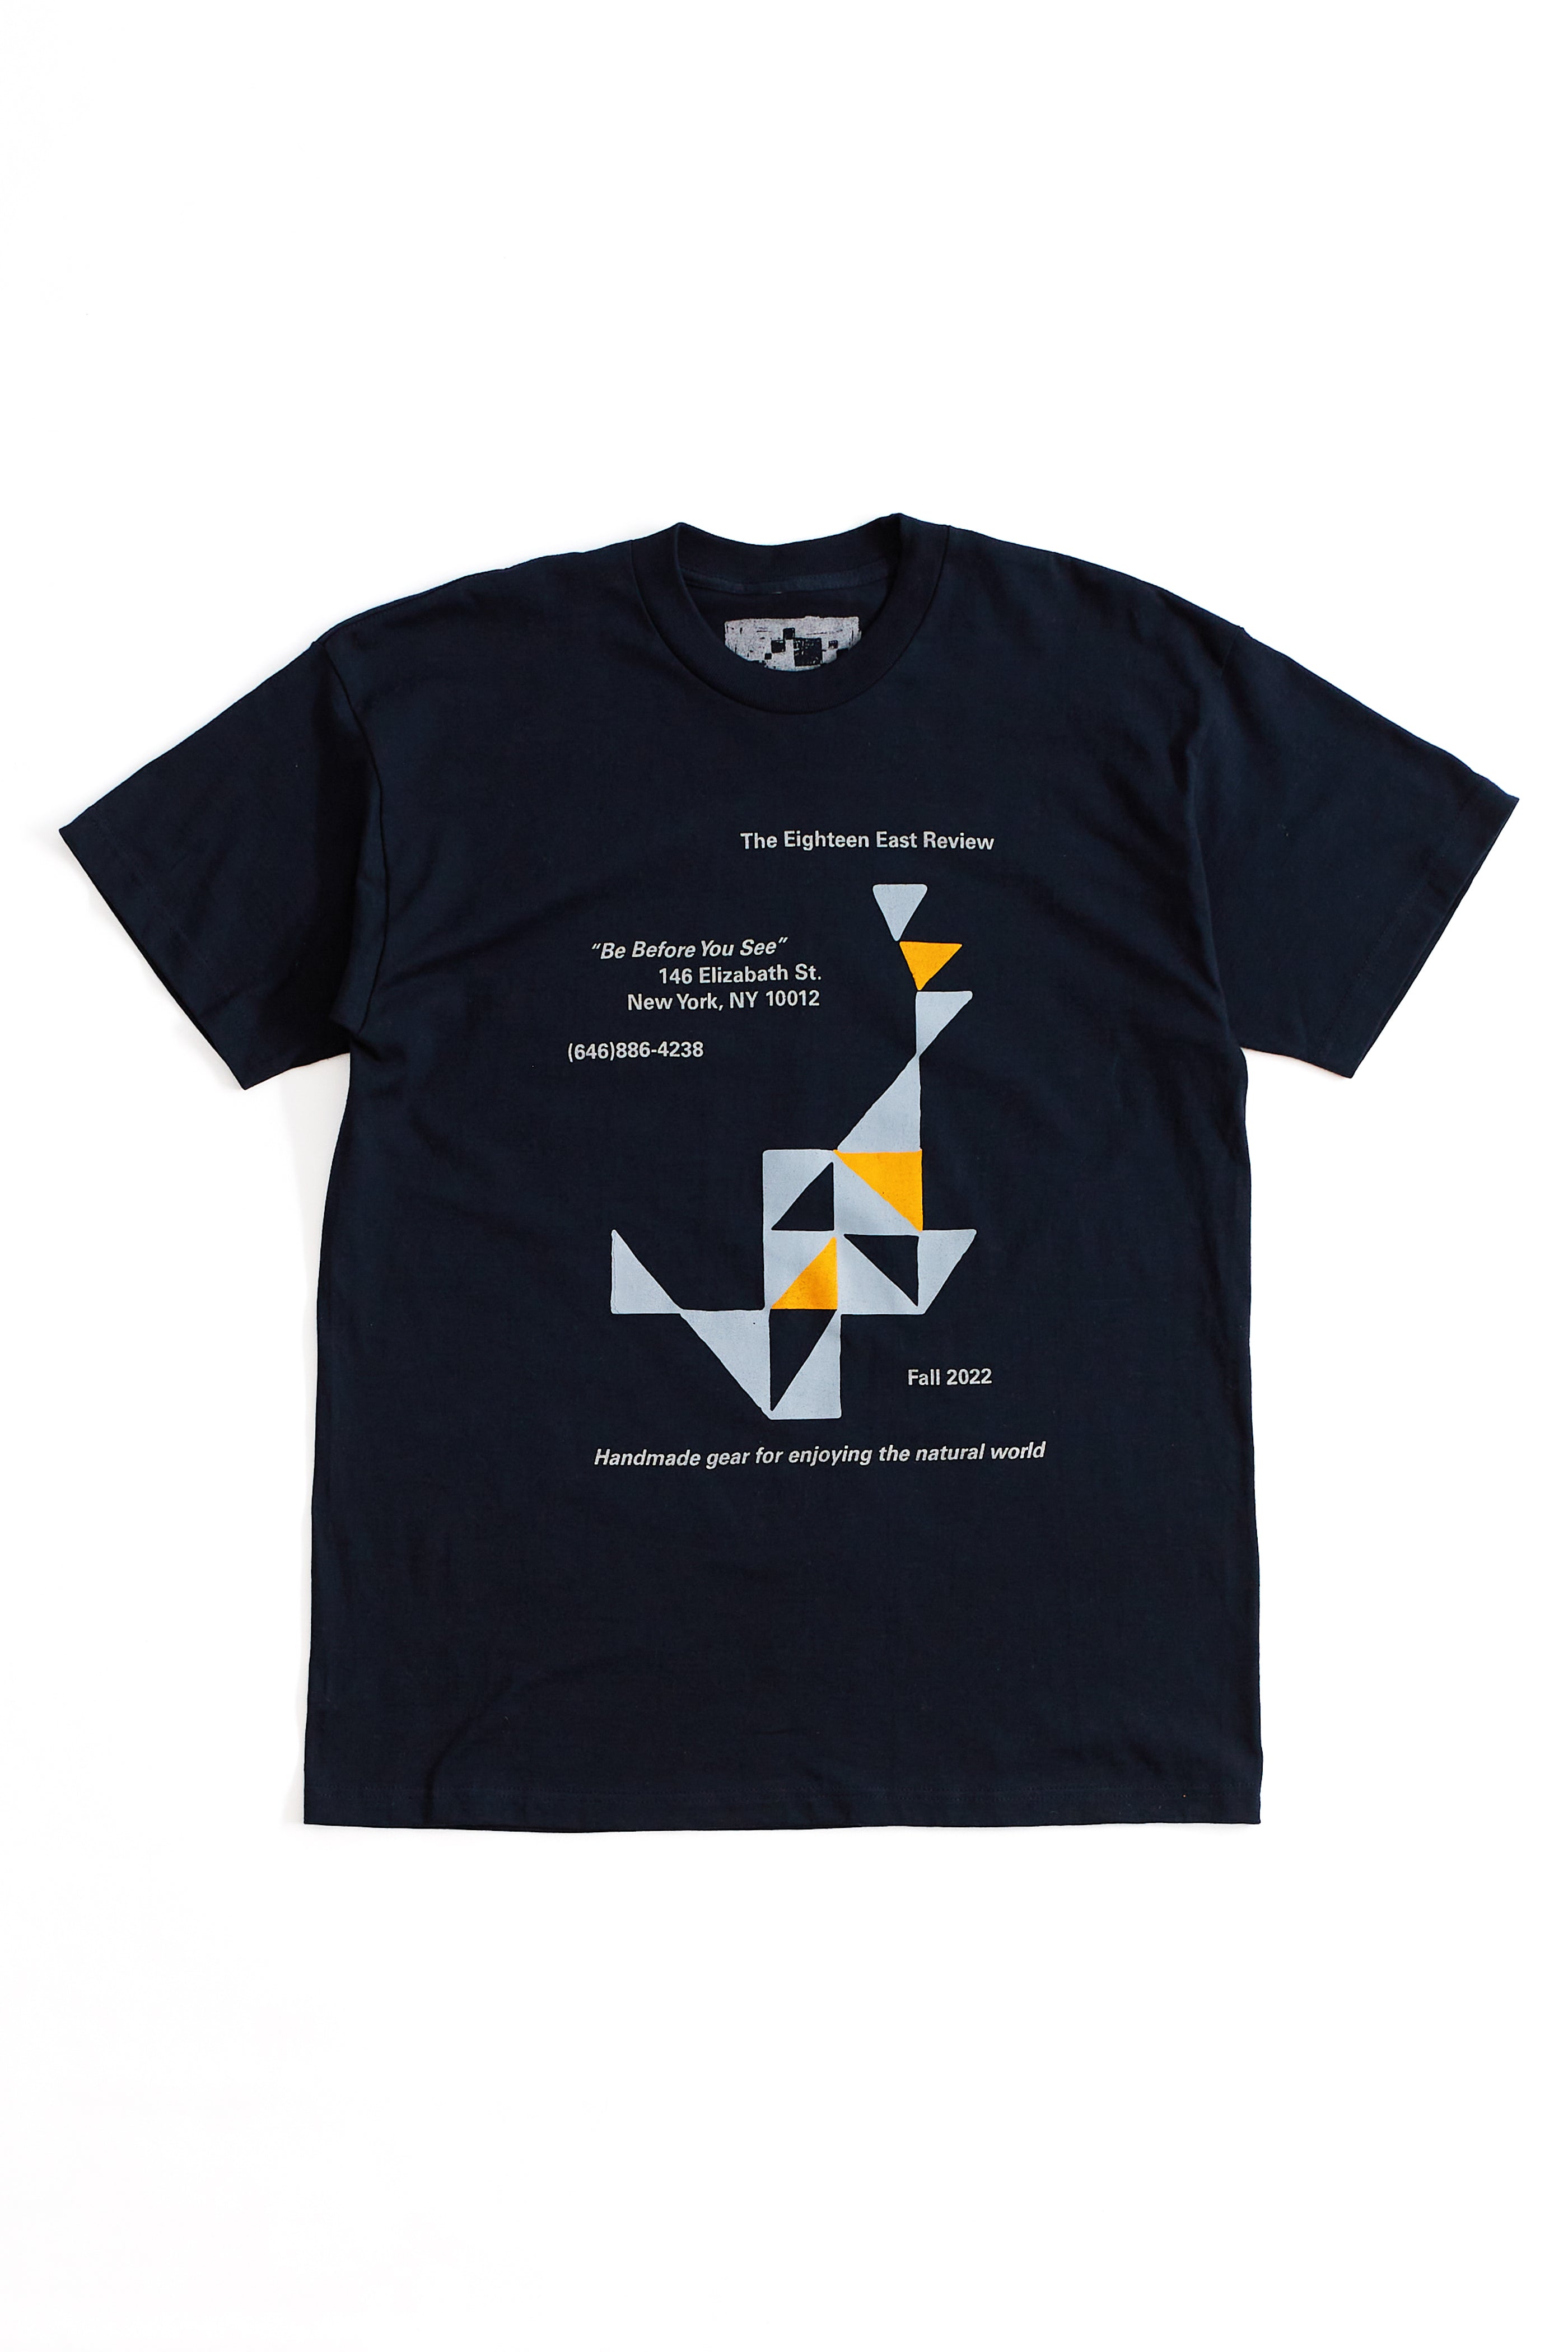 ROSA UNEARTHLY GOODS FOR 18 EAST REVIEW TEE - NAVY